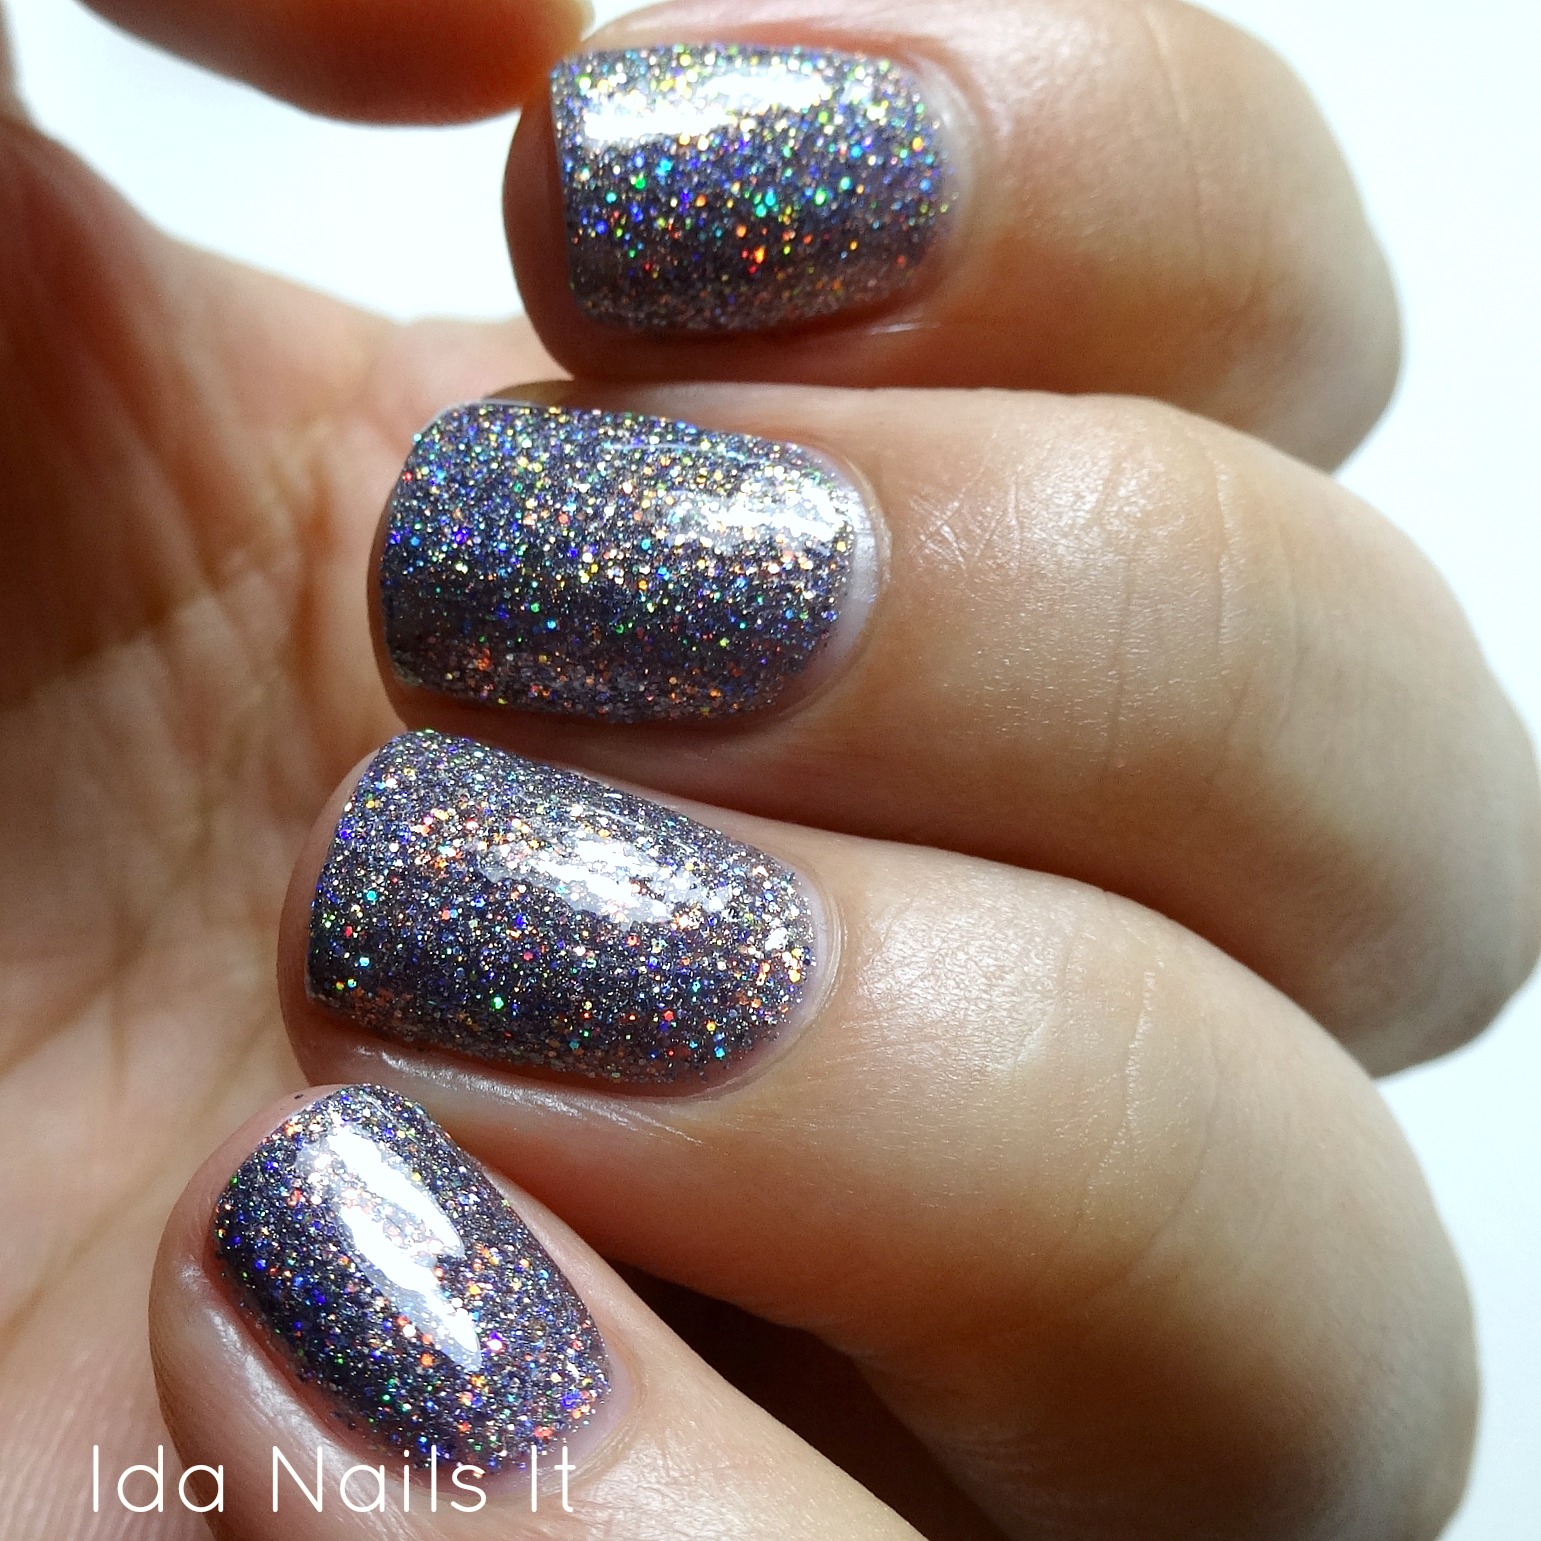 Ida Nails It: Illyrian Polish Fall 2016 Collection: Swatches and Review